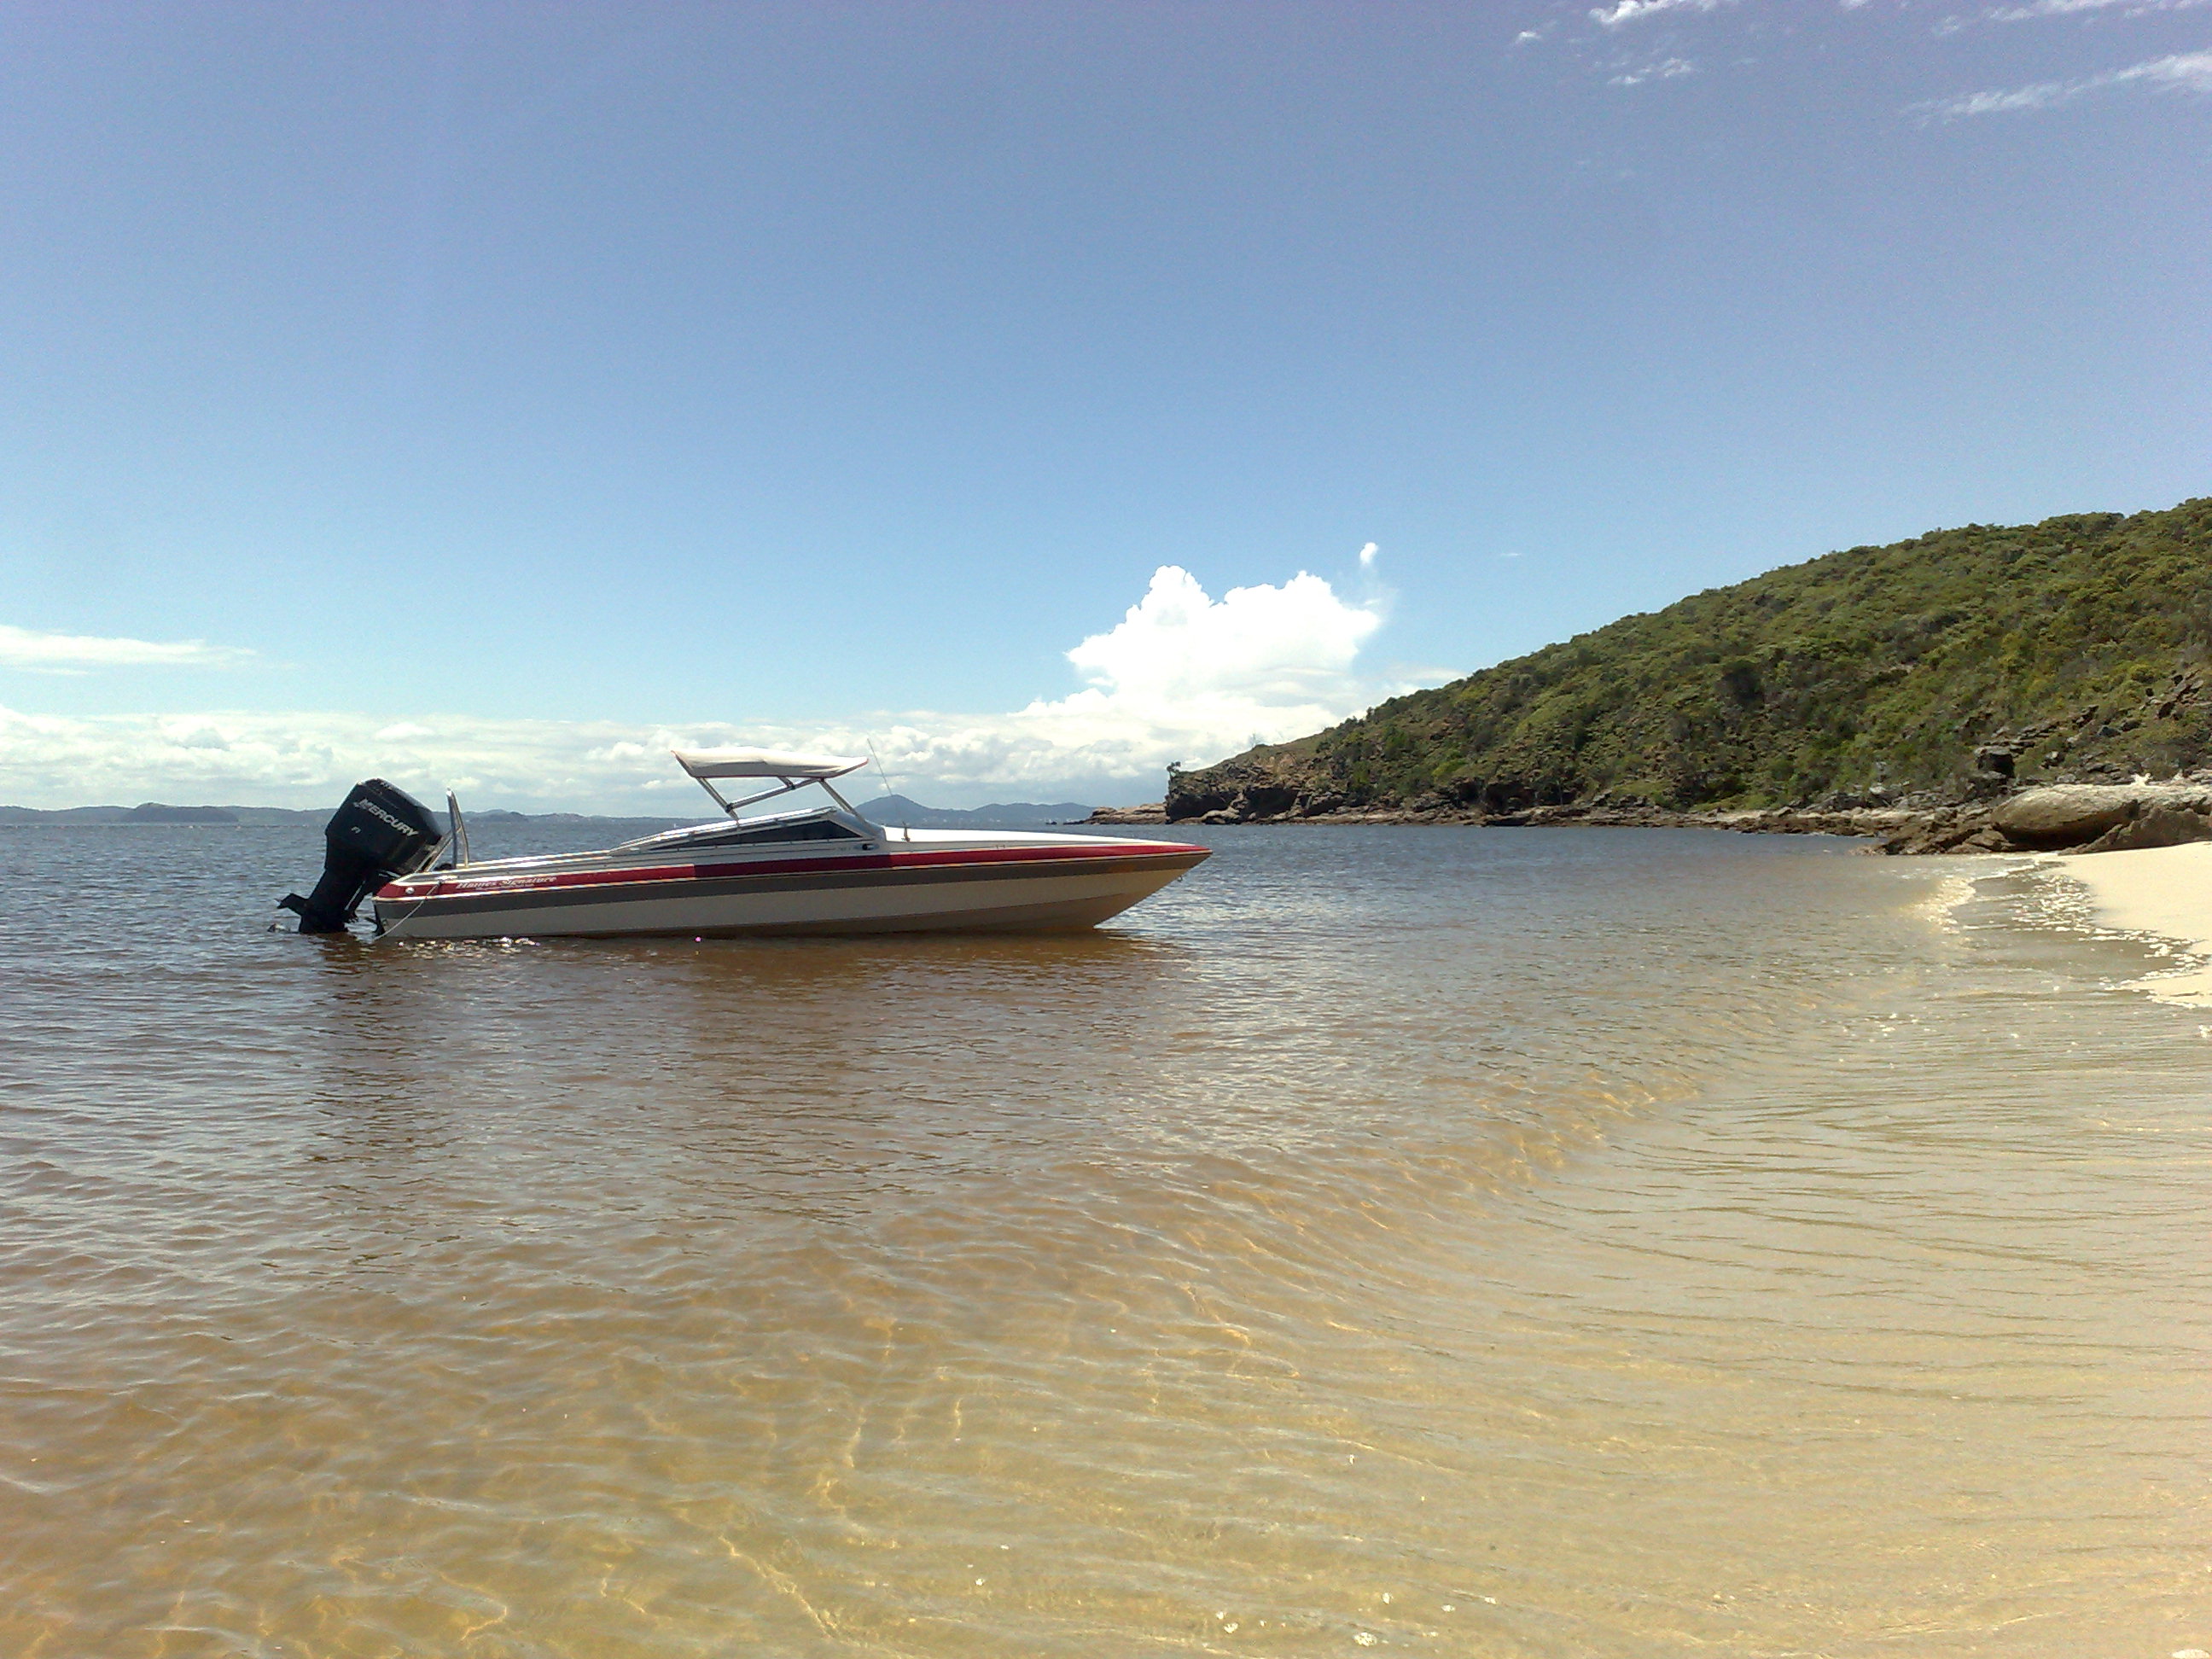 First Trip To Great Keppel Island After The Floods